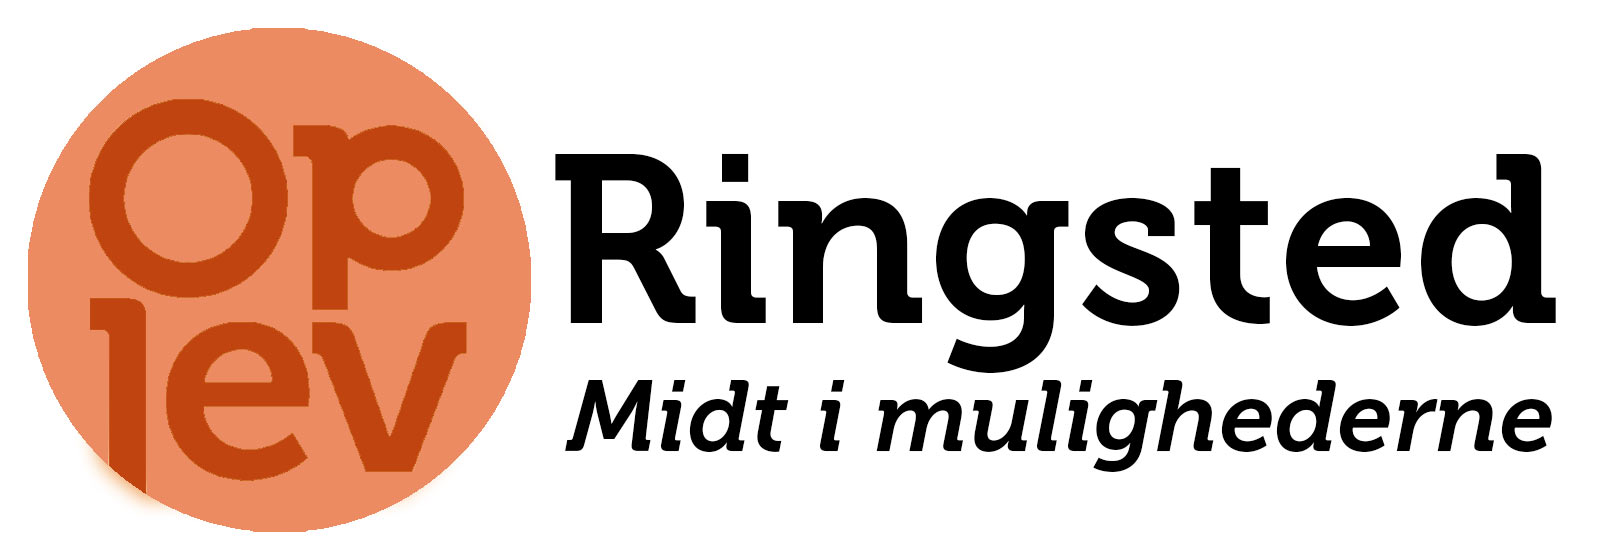 Oplev Ringsted